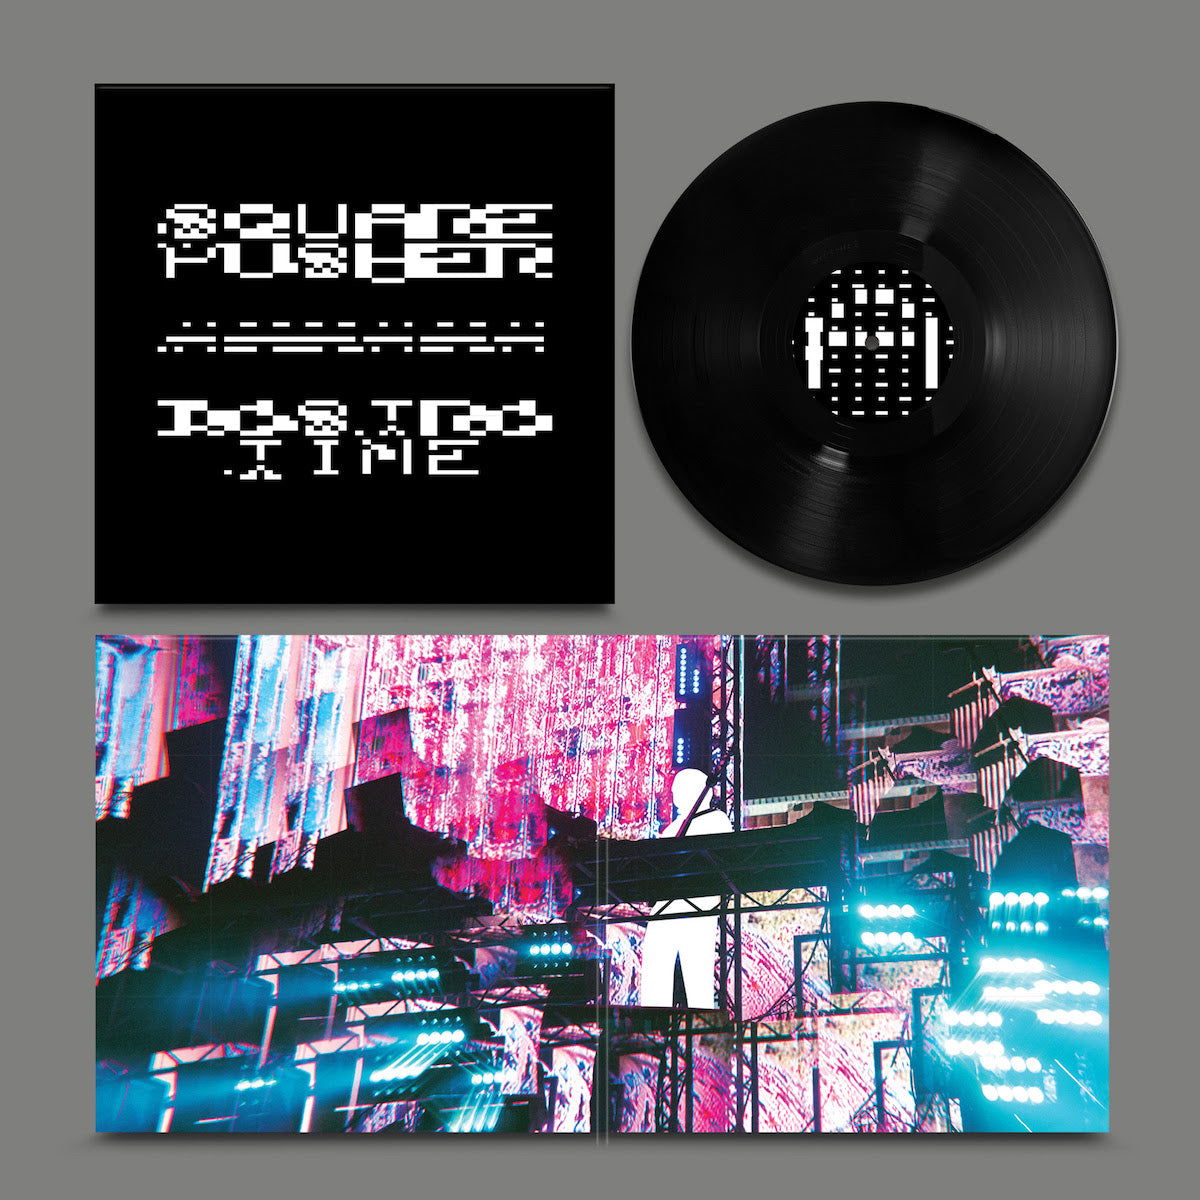 Squarepusher - Dostrotime | Buy the Vinyl LP from Flying Nun Records